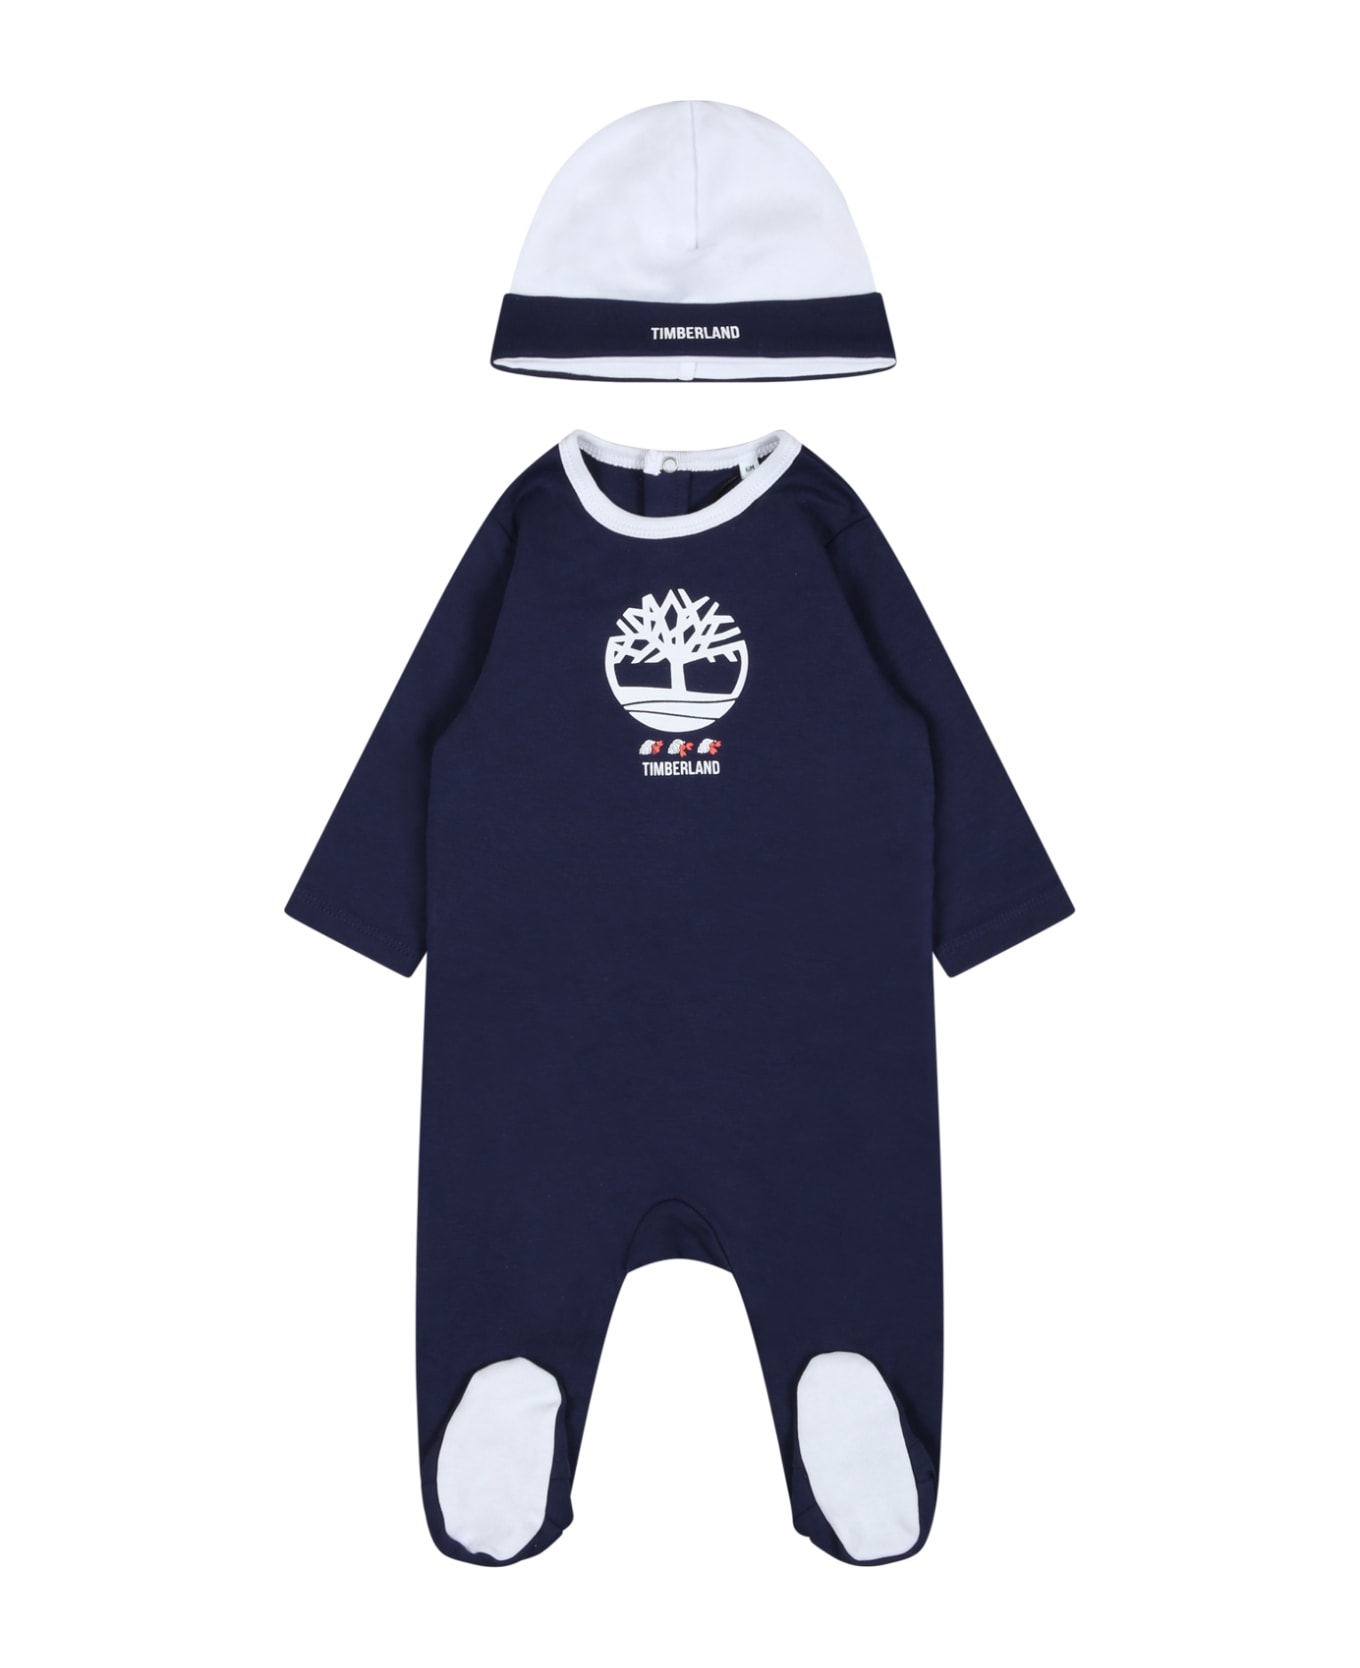 Timberland Multicolor Set For Baby Boy With Logo - Blue